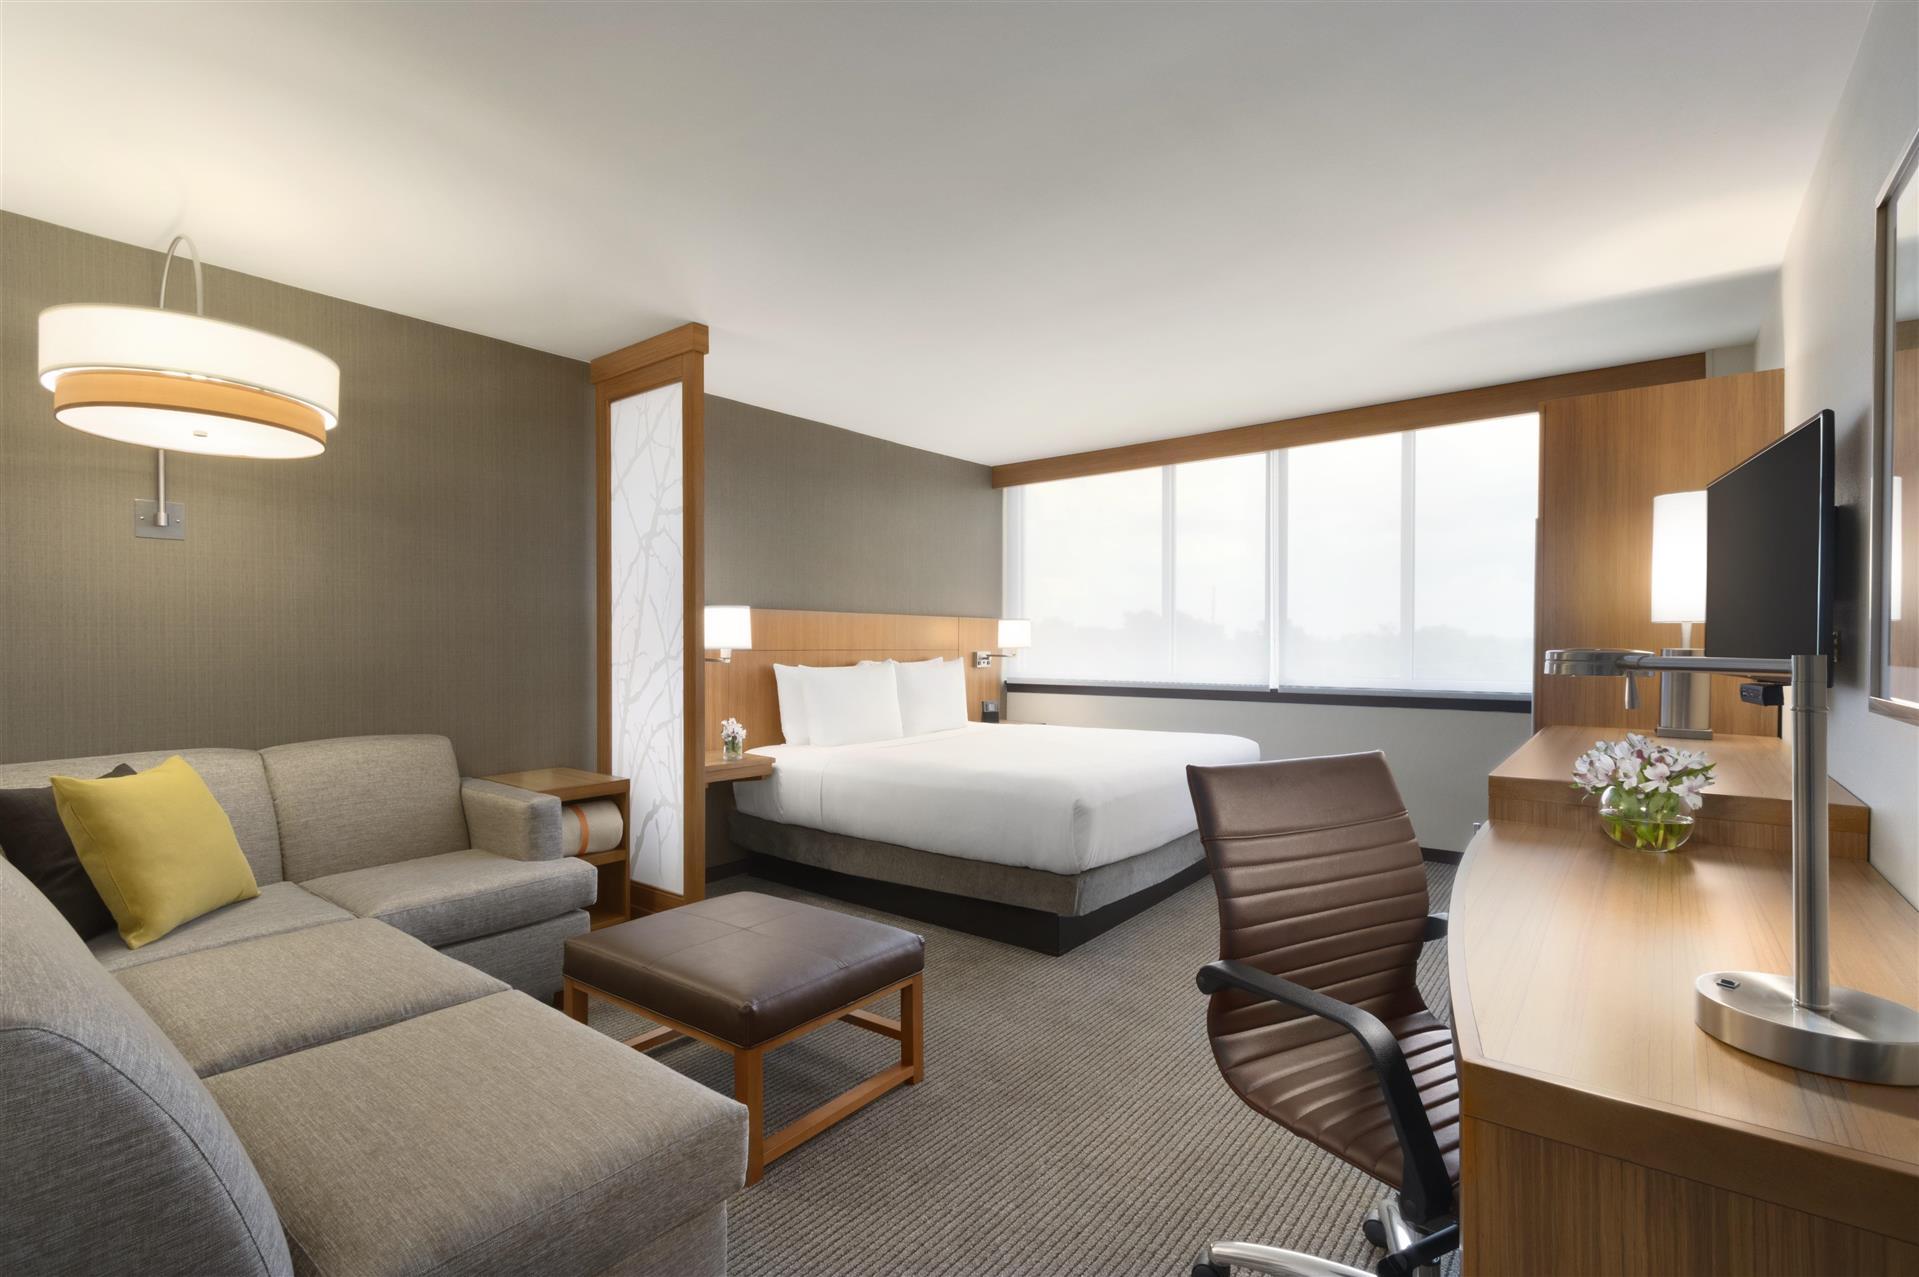 Hyatt Place Chicago/O'hare Airport in Rosemont, IL